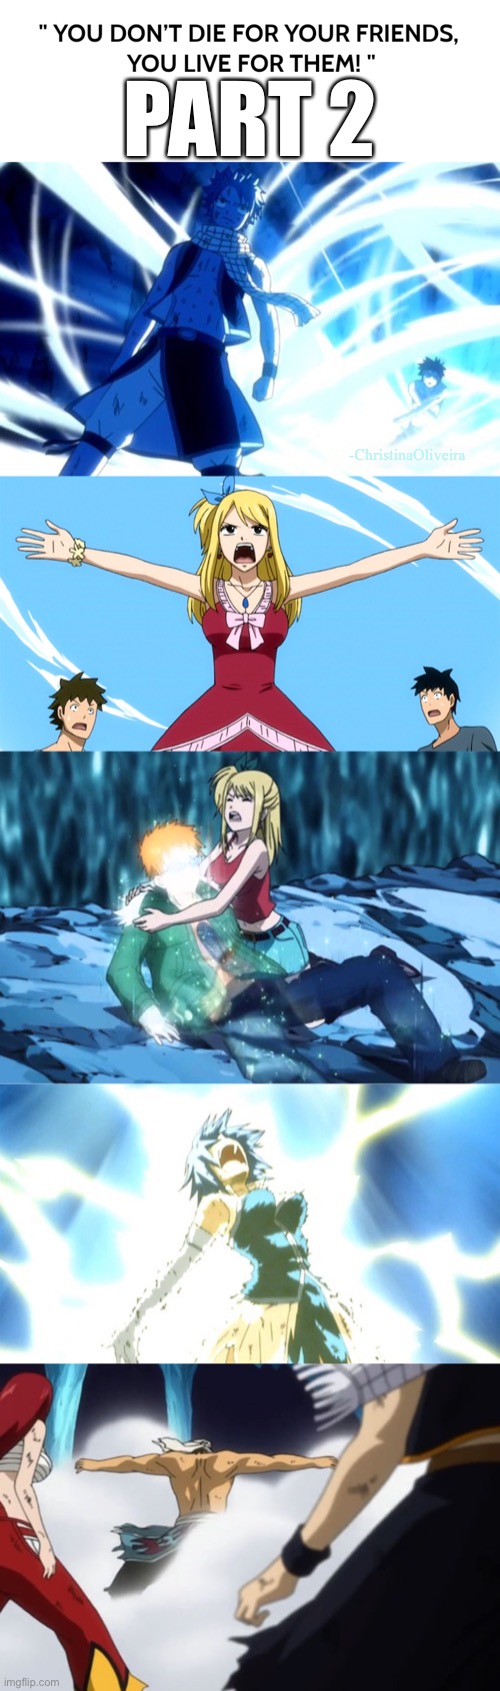 You don’t die for your friends - Part 2 | PART 2; -ChristinaOliveira | image tagged in fairy tail,fairy tail meme,fairy tail guild,natsu fairytail,natsu,quotes | made w/ Imgflip meme maker